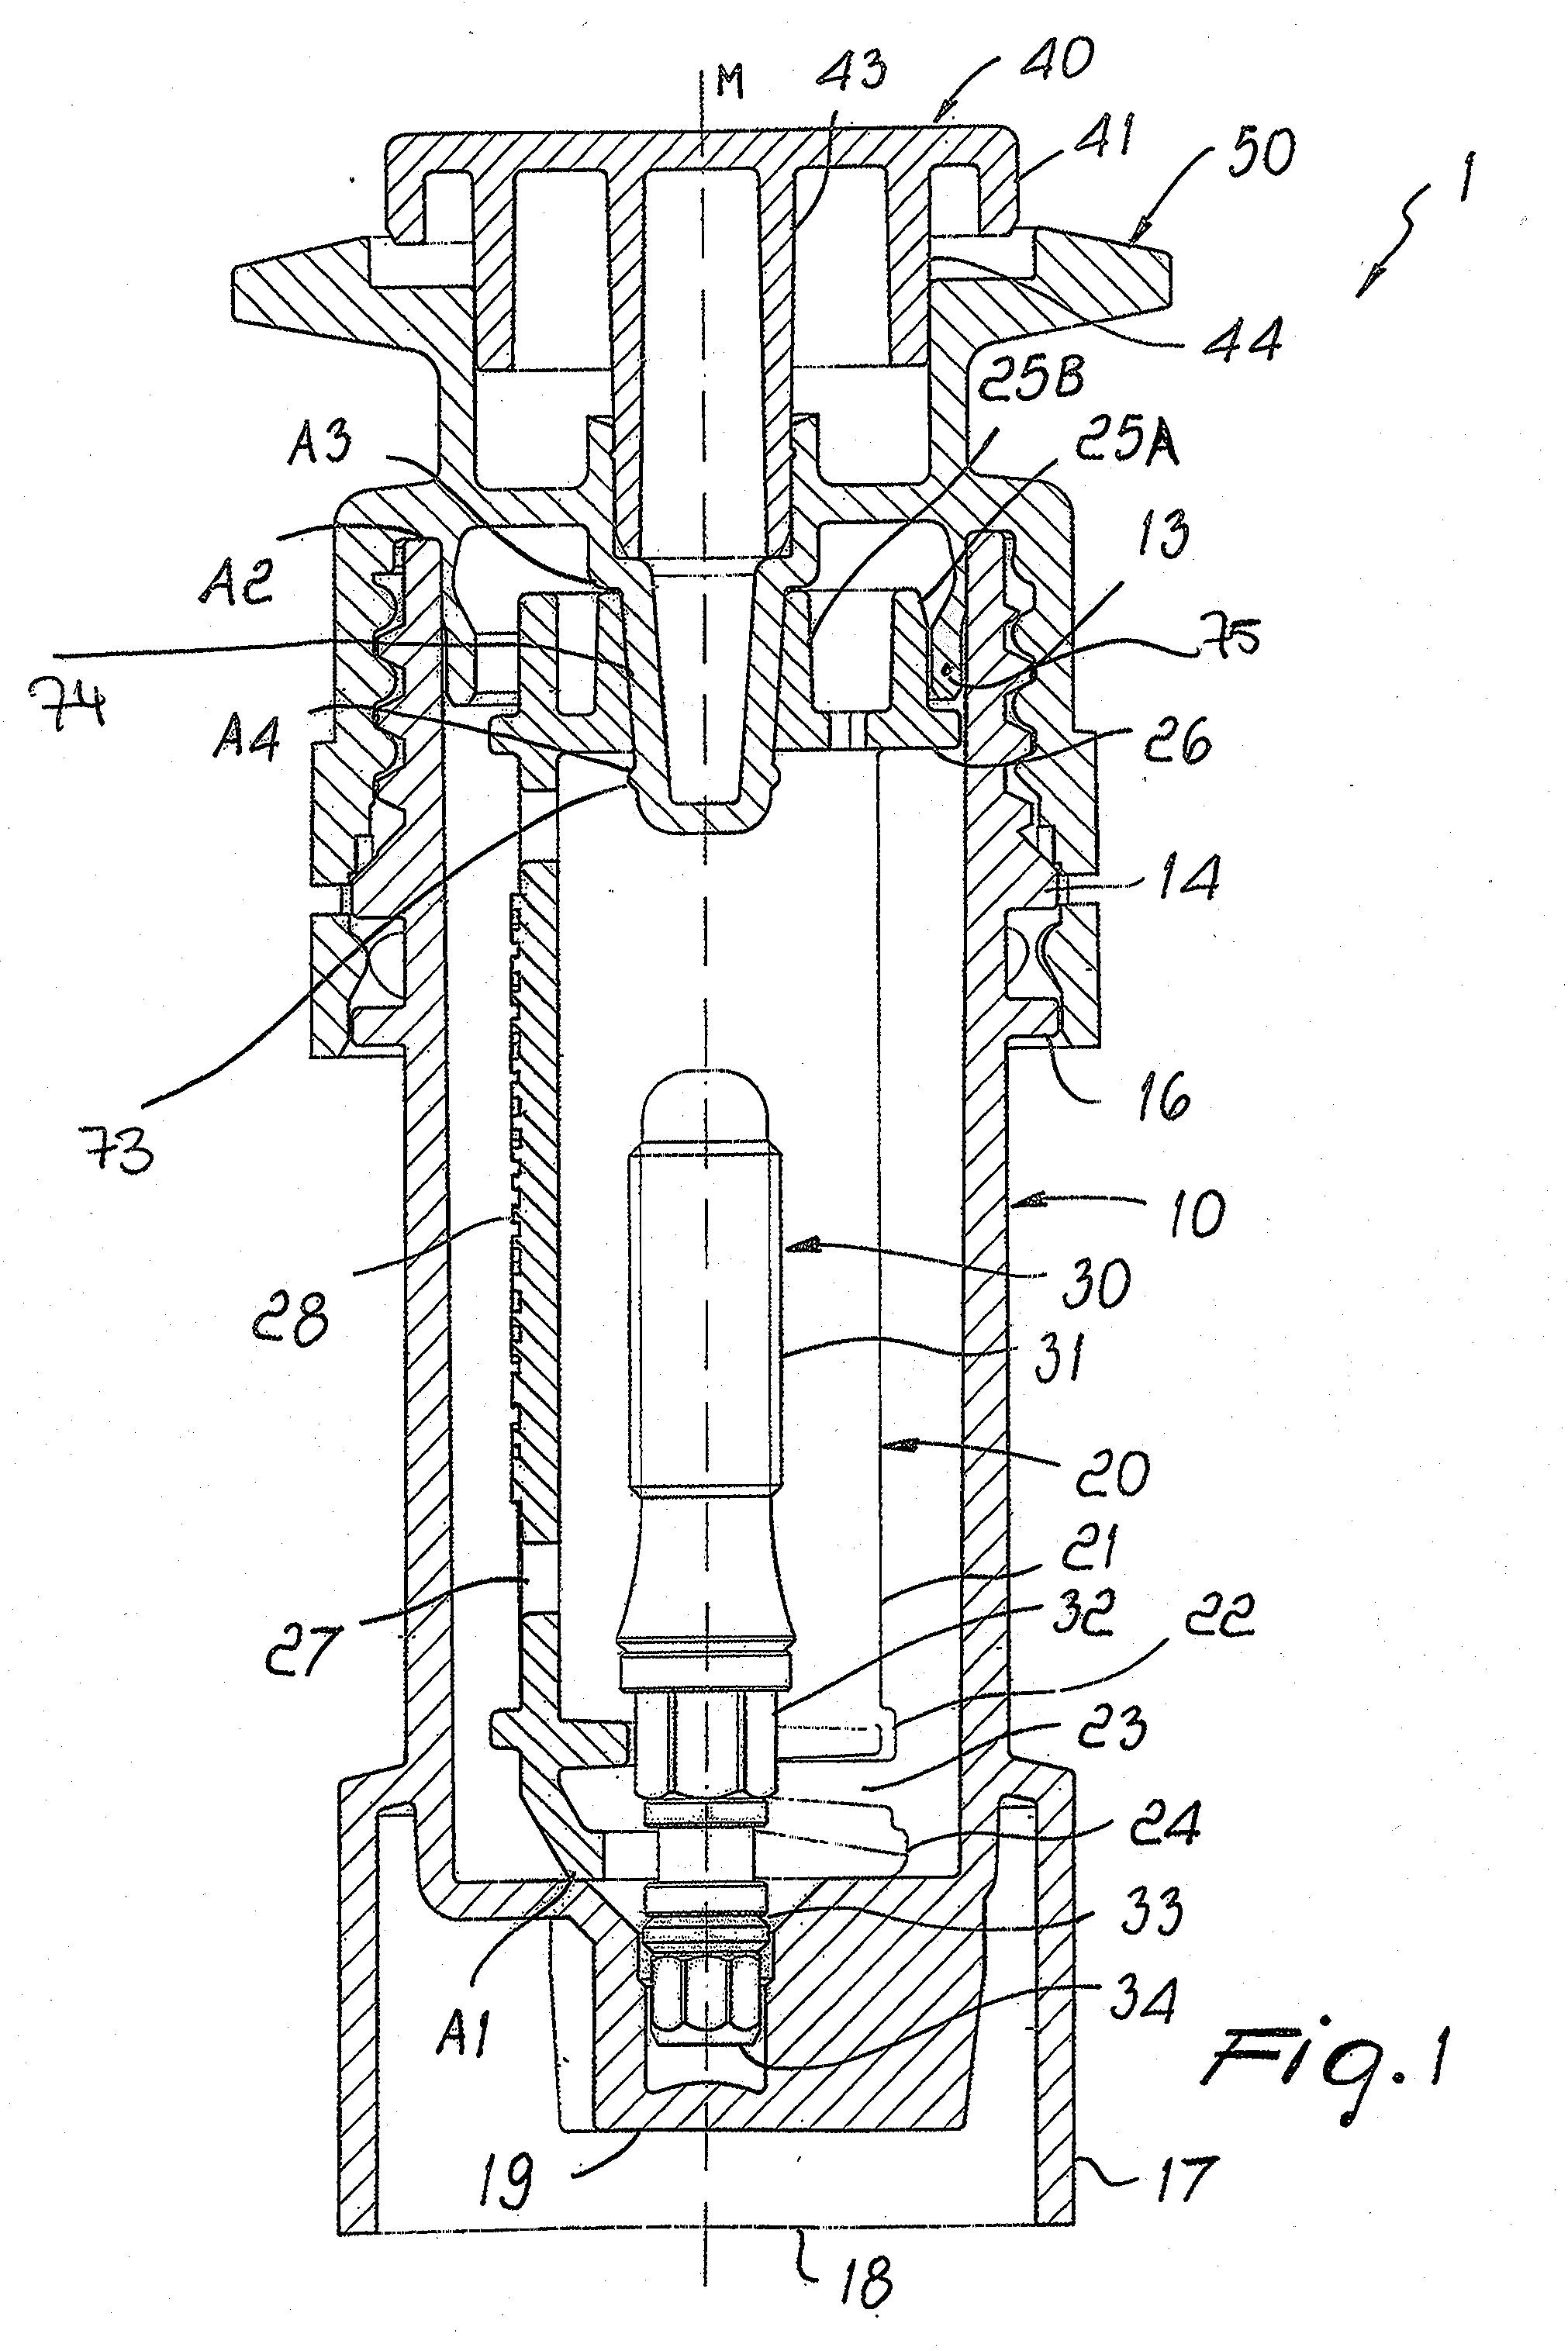 External Container for an Implant Carrier